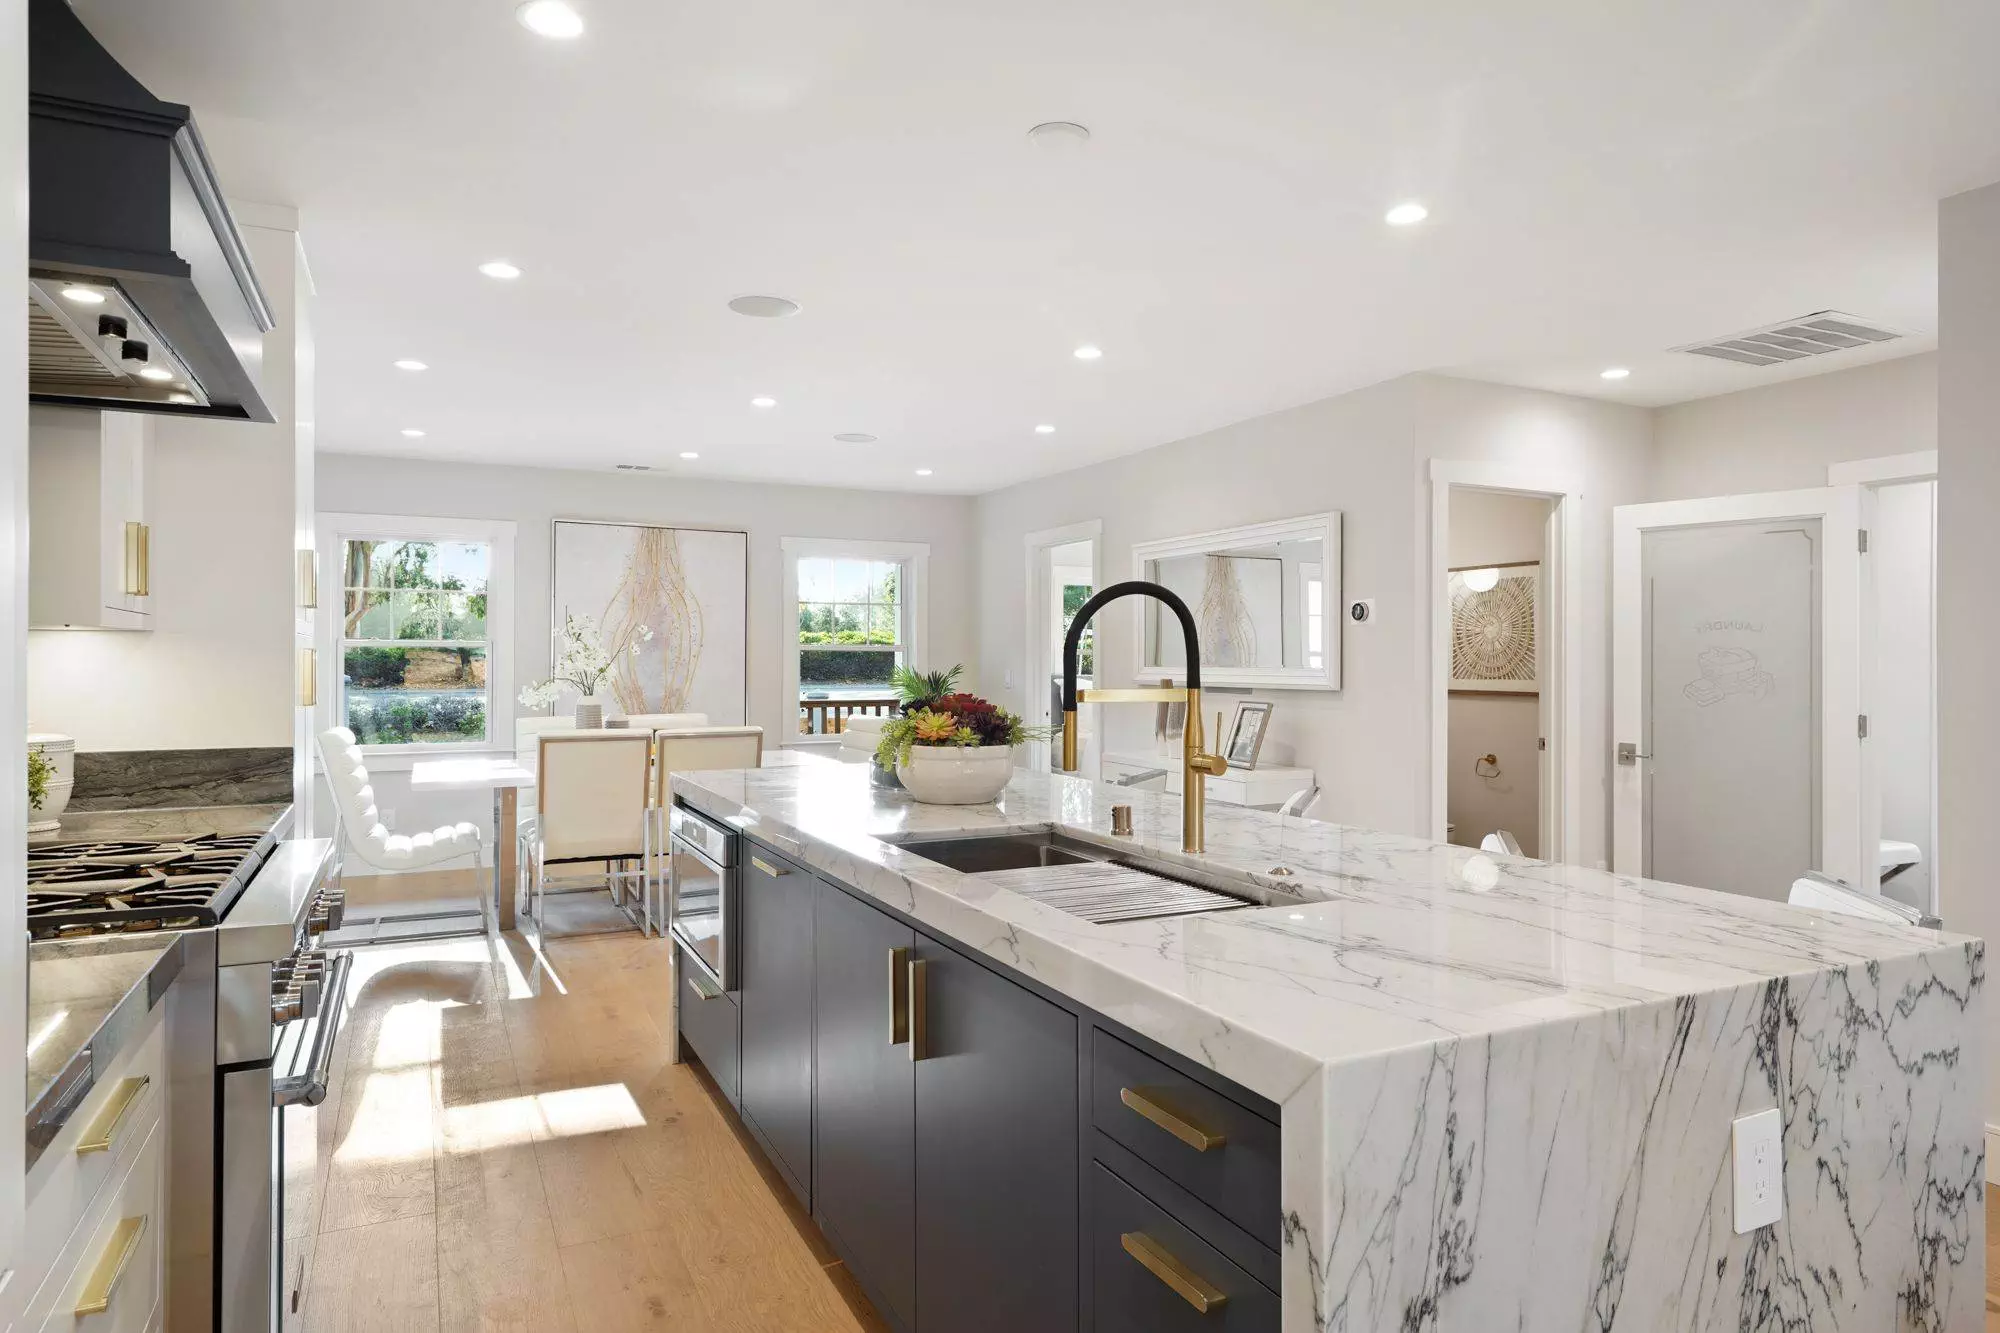 Modern kitchen interior with marble countertops, stainless steel appliances, and an open layout leading to a dining area with natural light, perfect for a construction portfolio showcase.